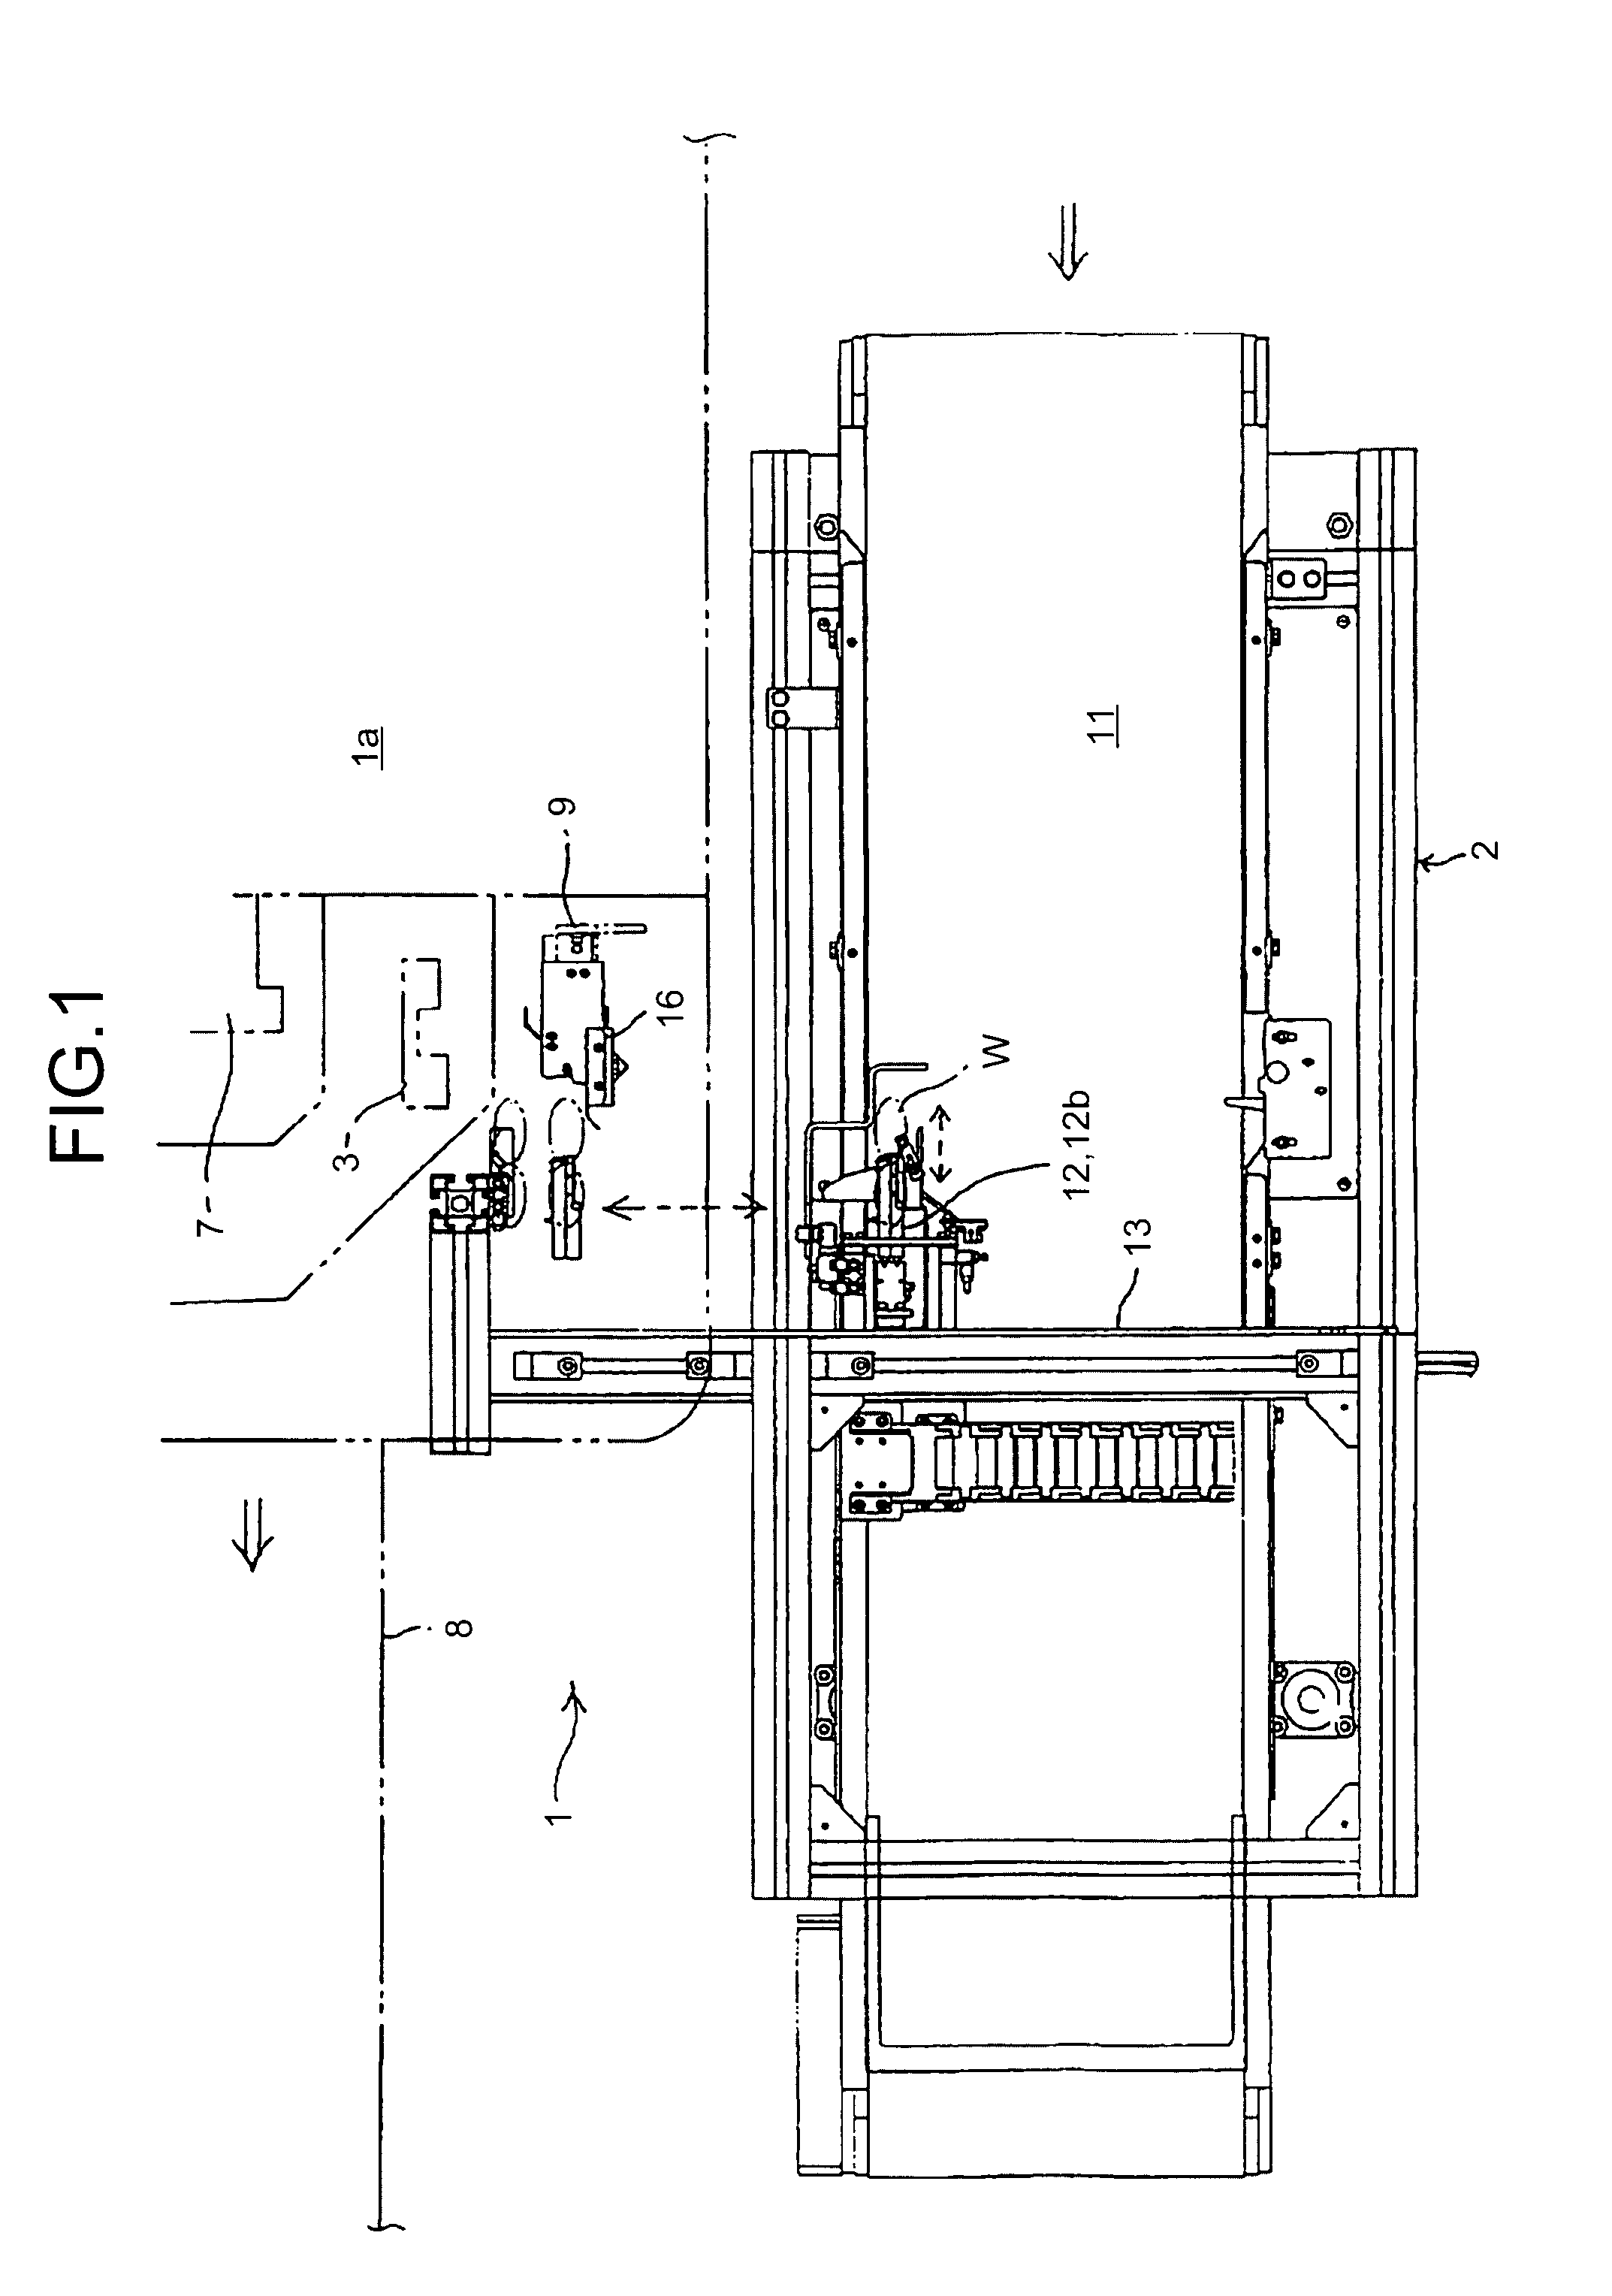 Grafted seedling producing device